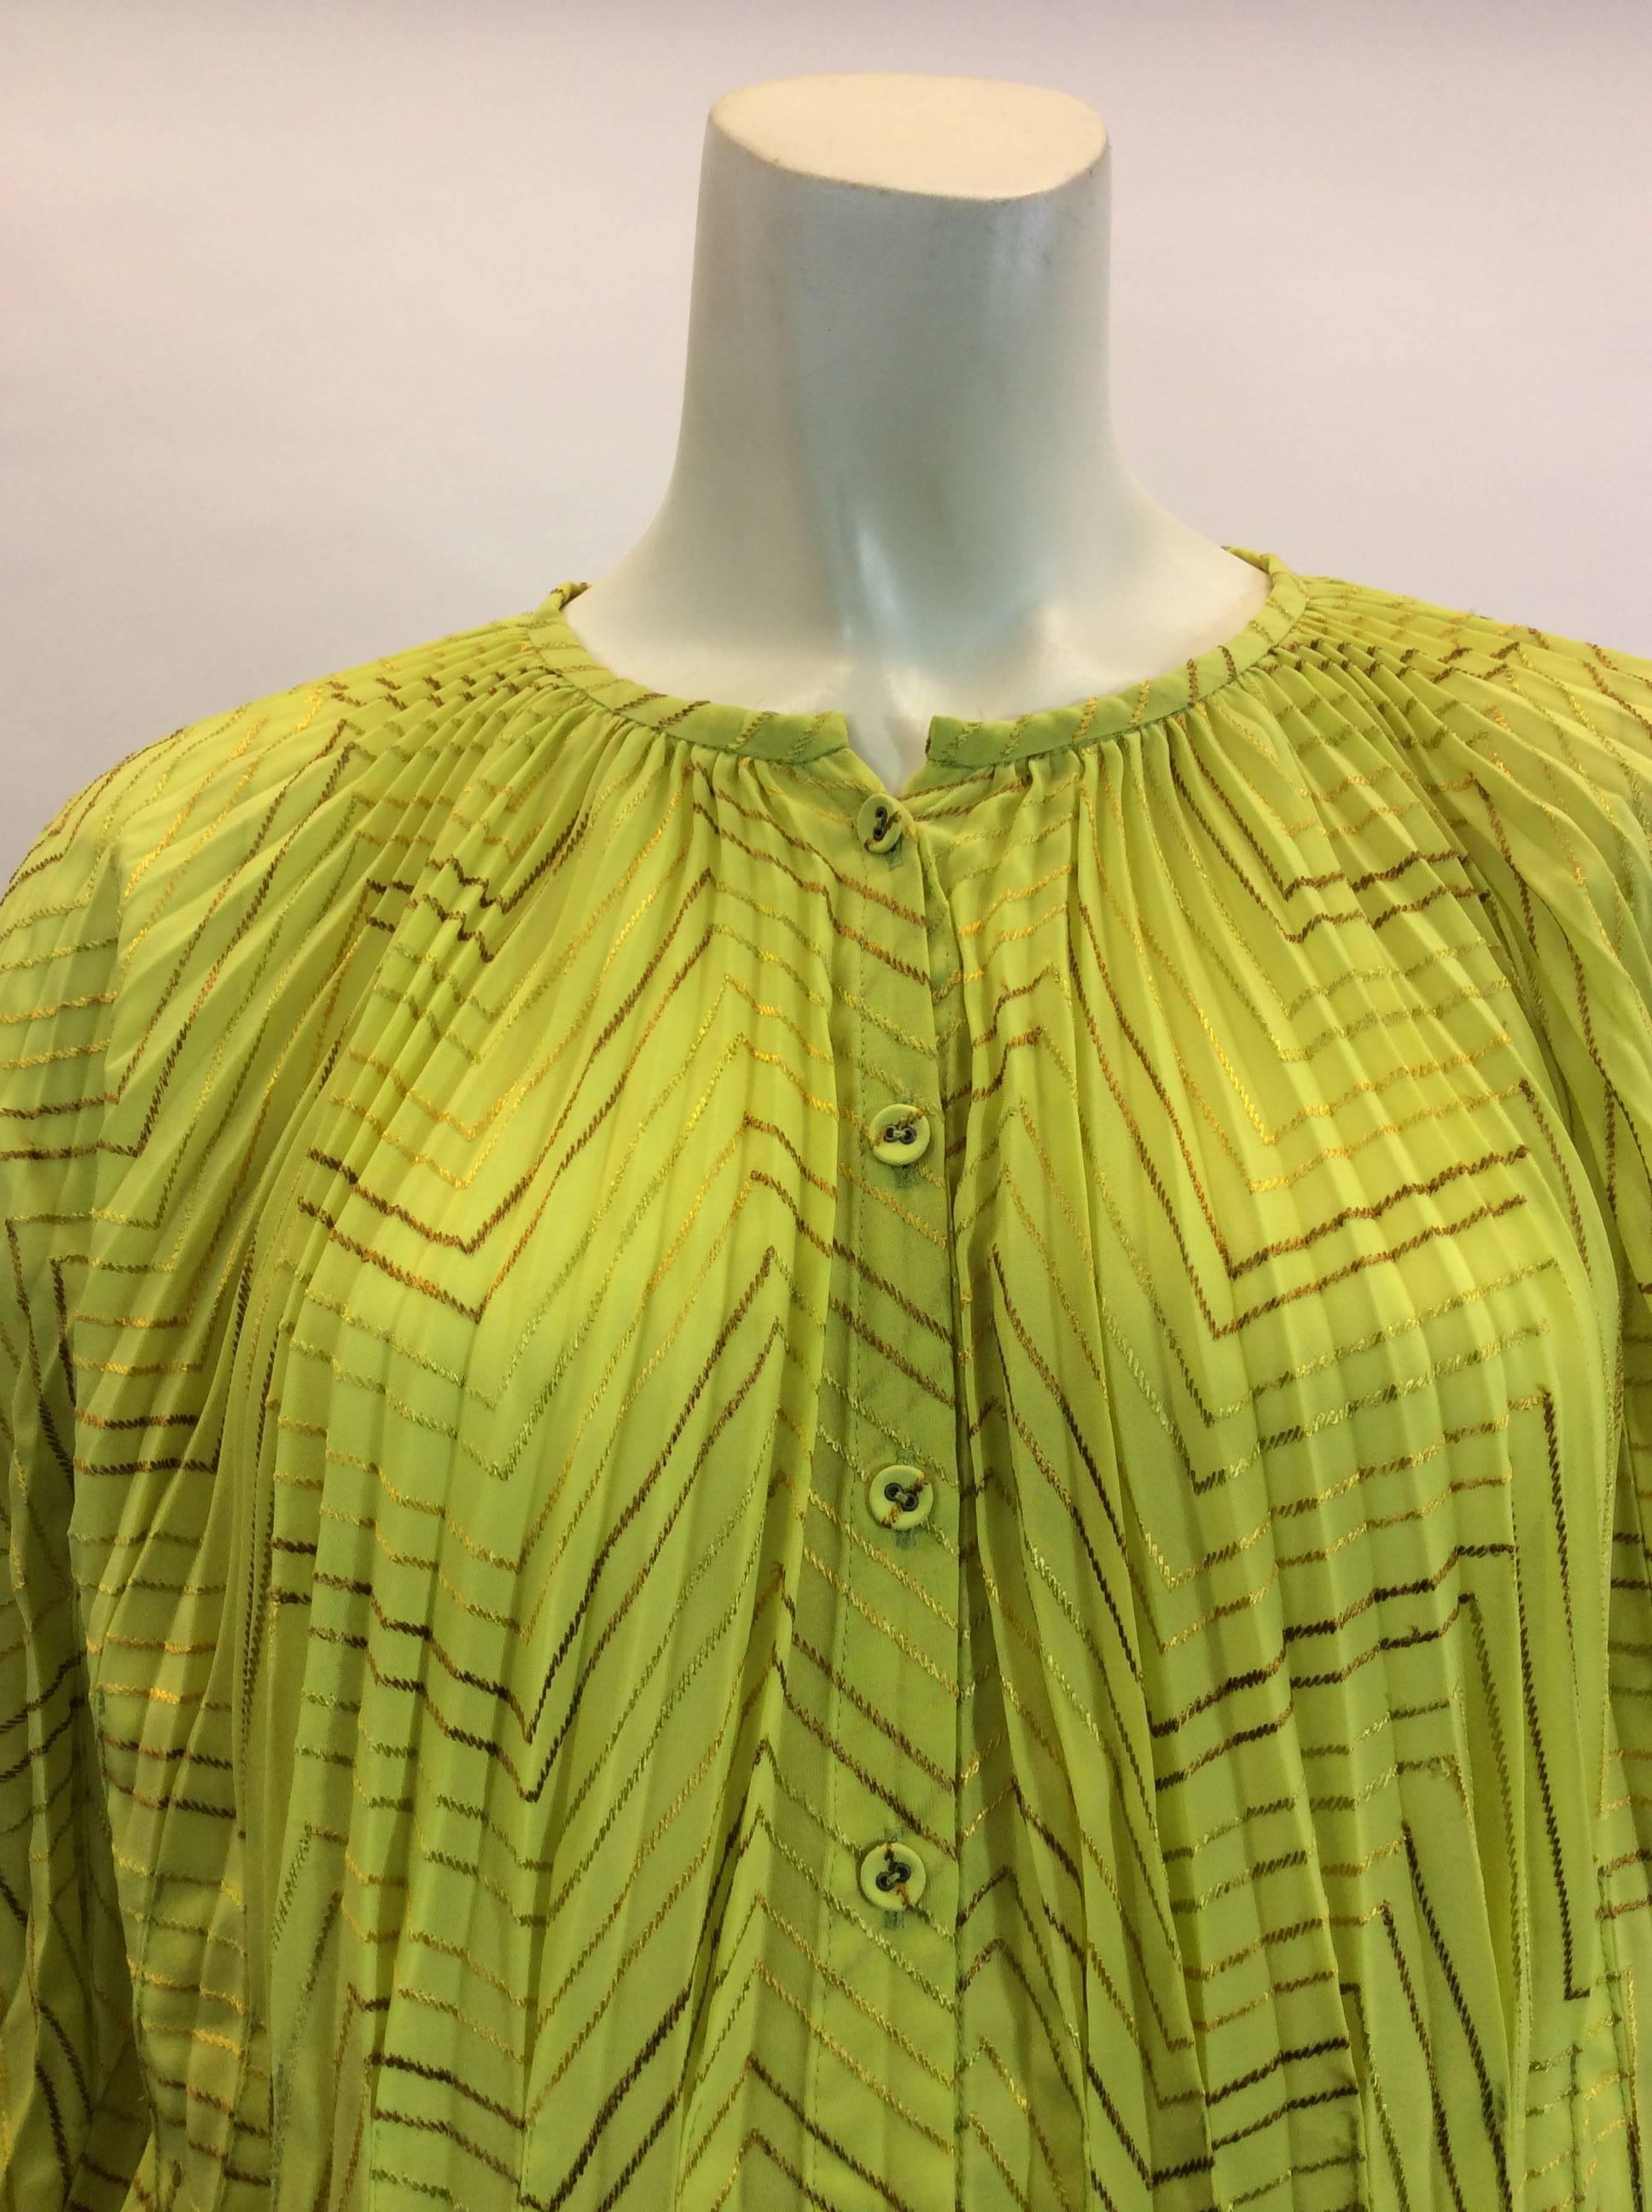 Issey Miyake
Yellow top with gold stitching
Buttondown
100% Polyester
Made in Japan
Intricate sleeve detailing - noted in photo